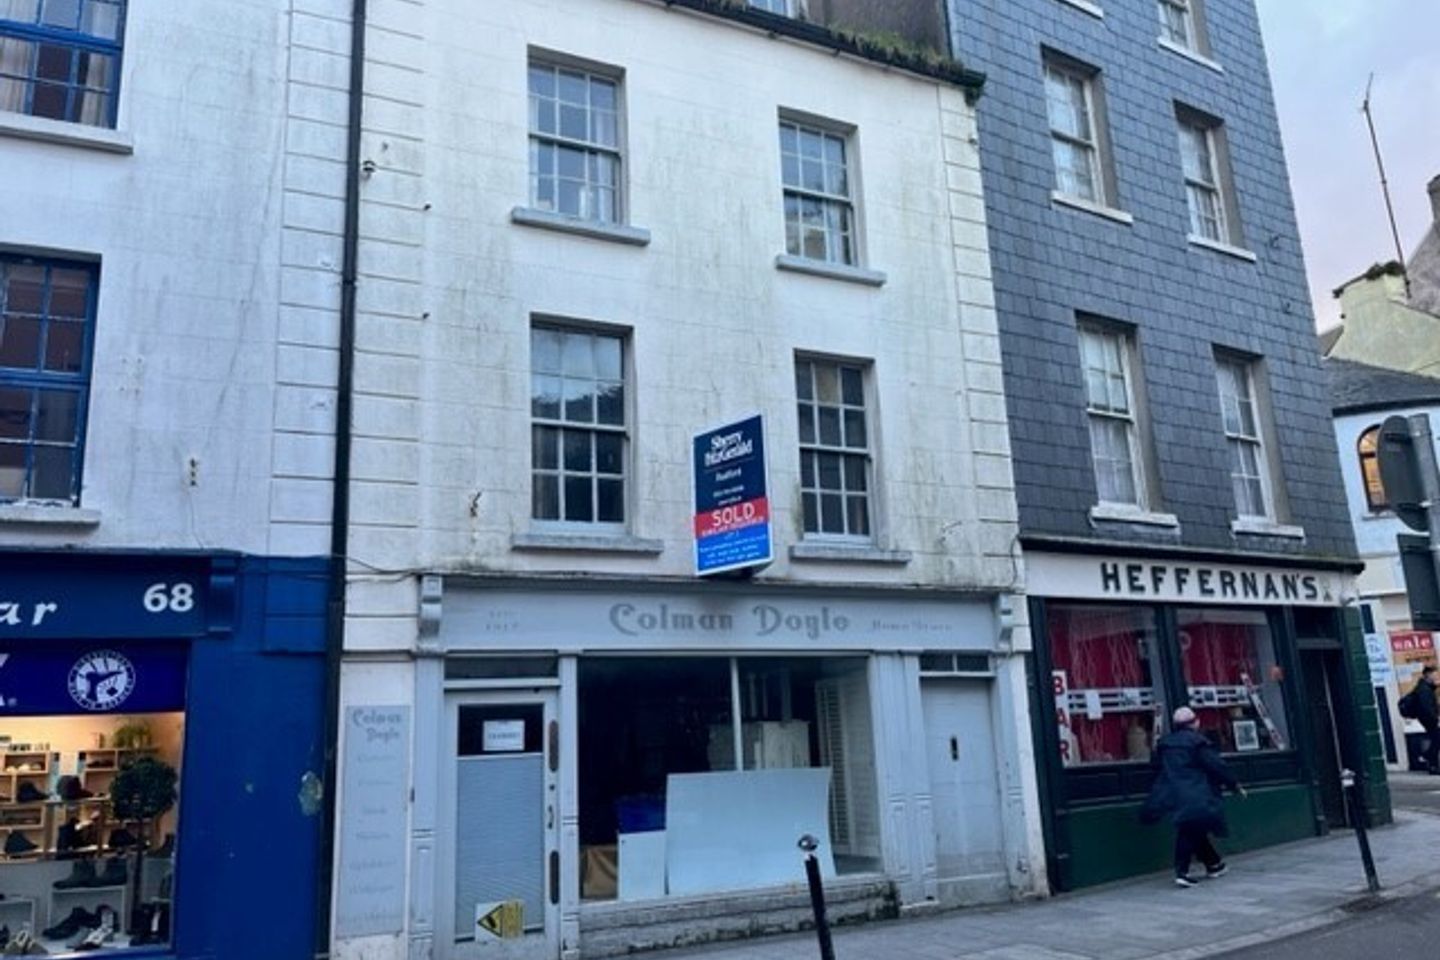 66 South Main Street, Wexford Town, Co. Wexford